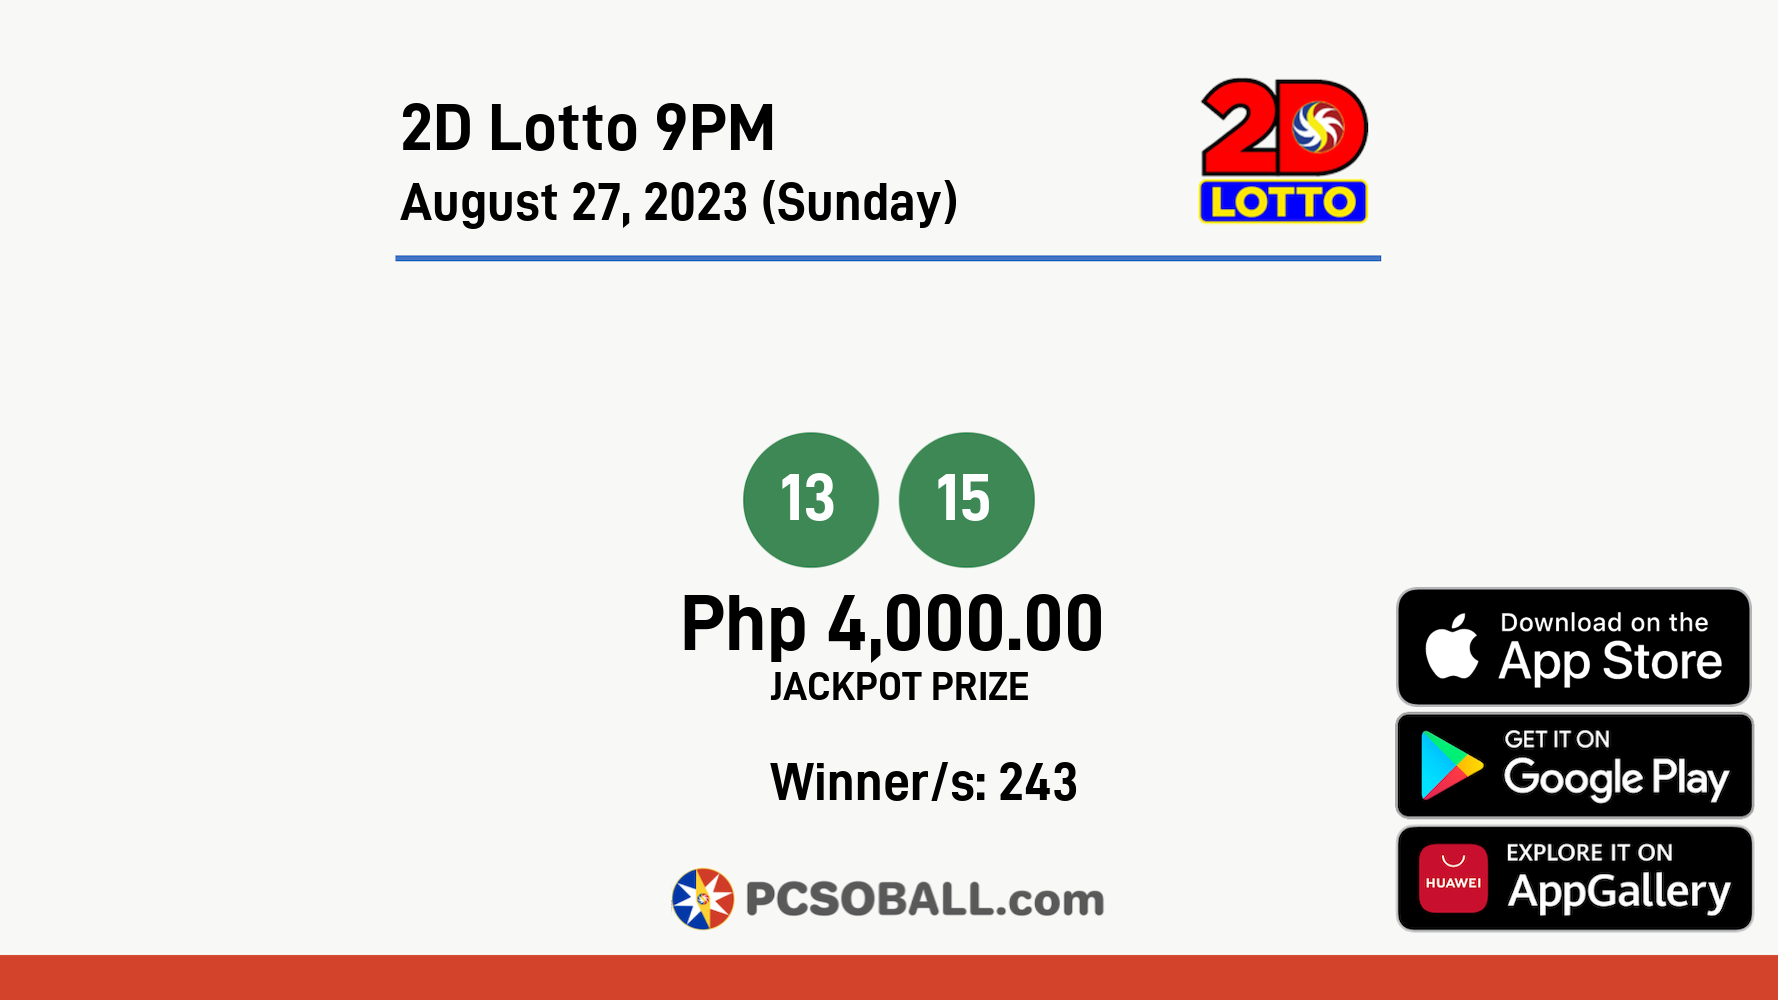 2D Lotto 9PM August 27, 2023 (Sunday) Result